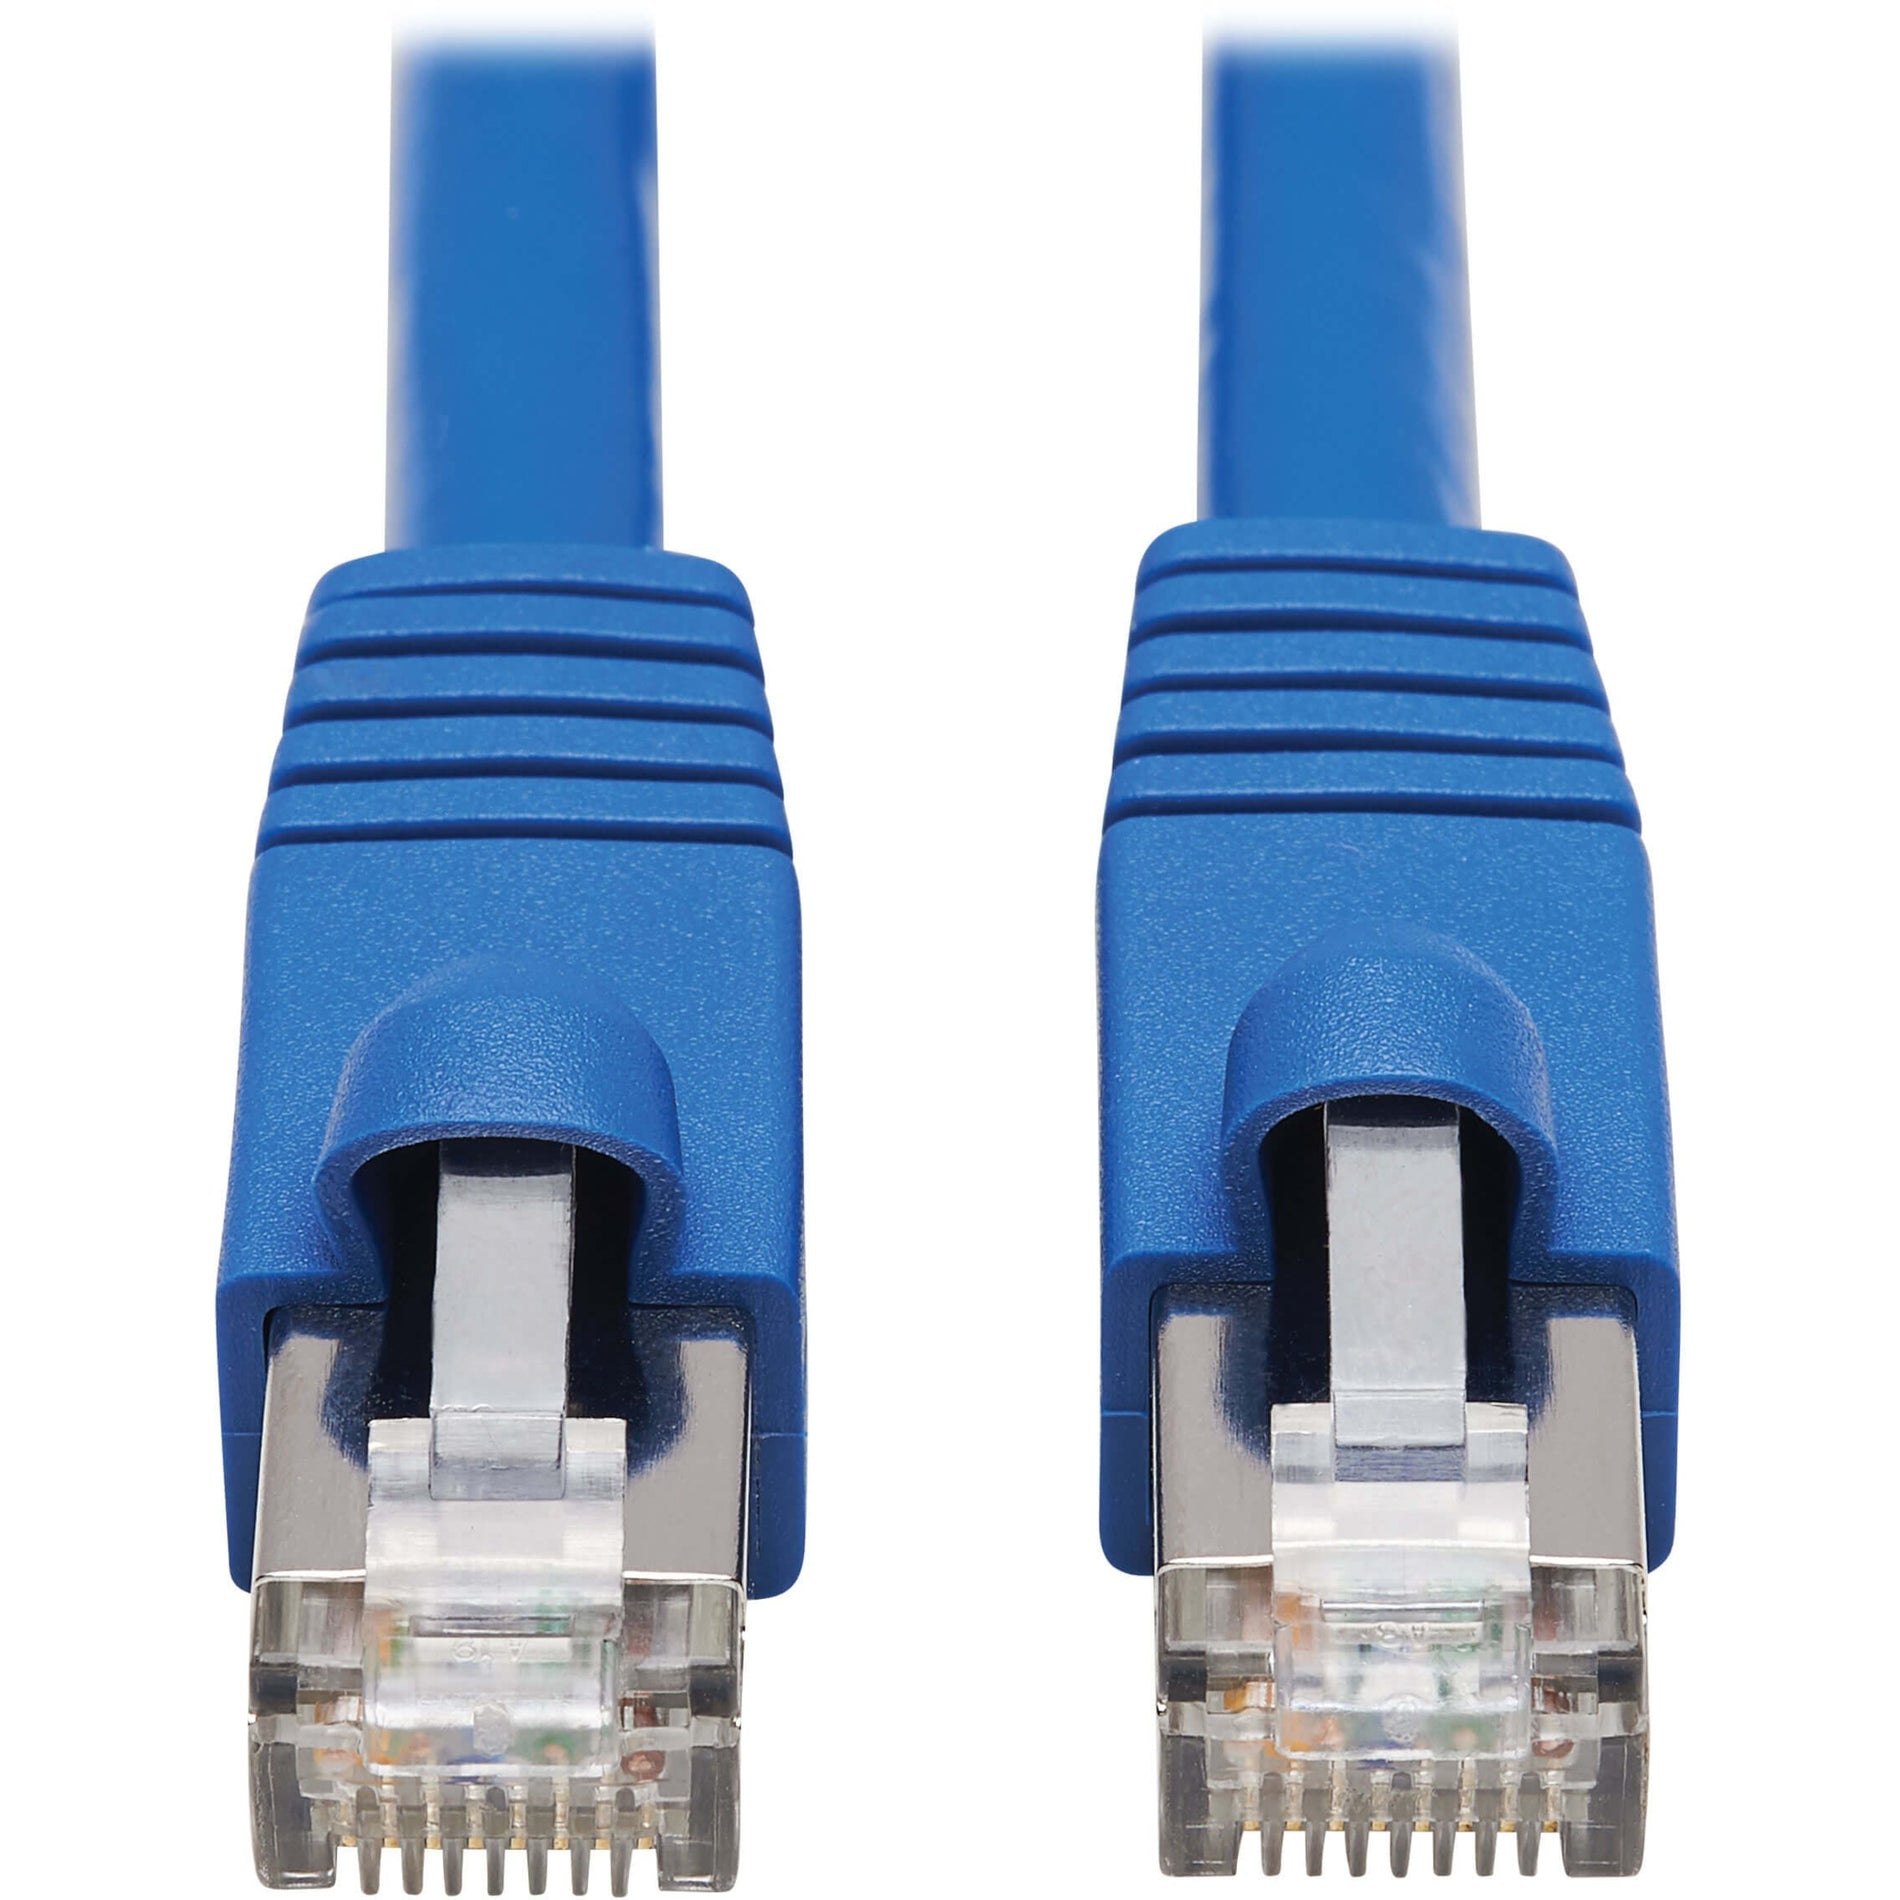 Tripp Lite N261P-010-BL Cat6a 10G-Certified Snagless F/UTP Network Patch Cable, Blue, 10 ft.